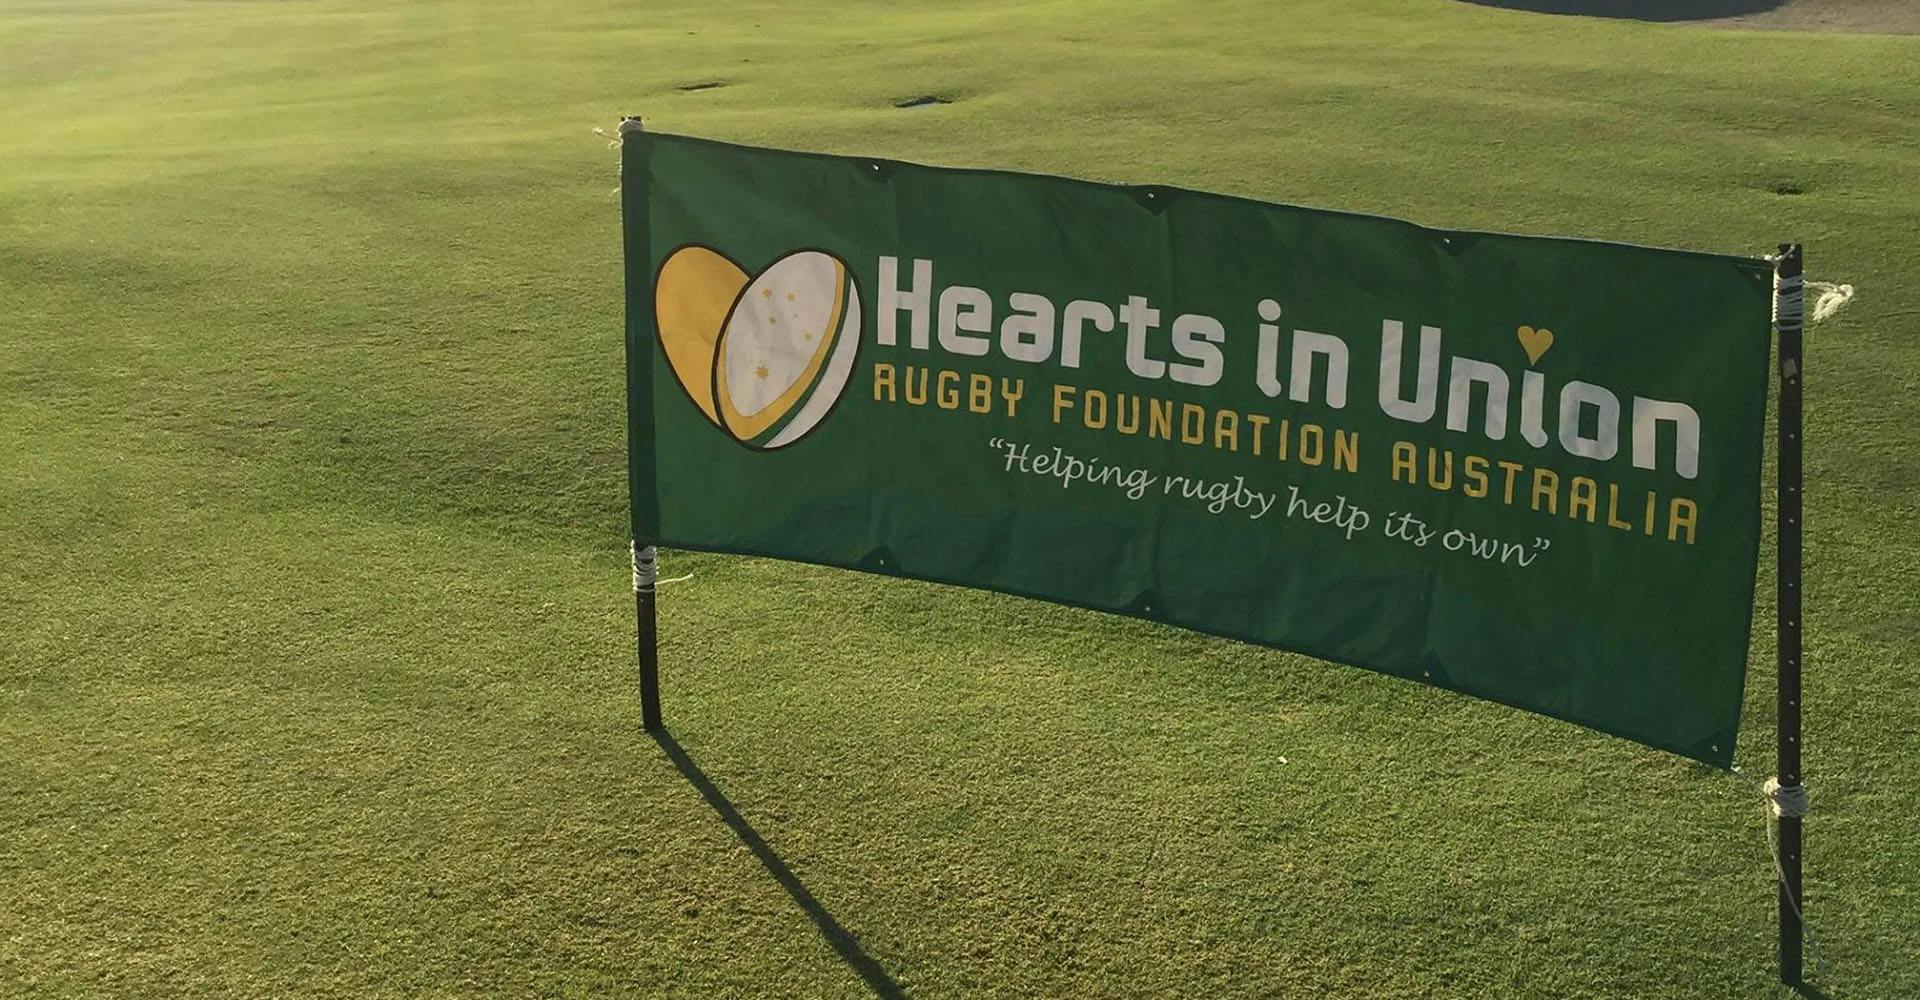 Hearts in Rugby Union Events